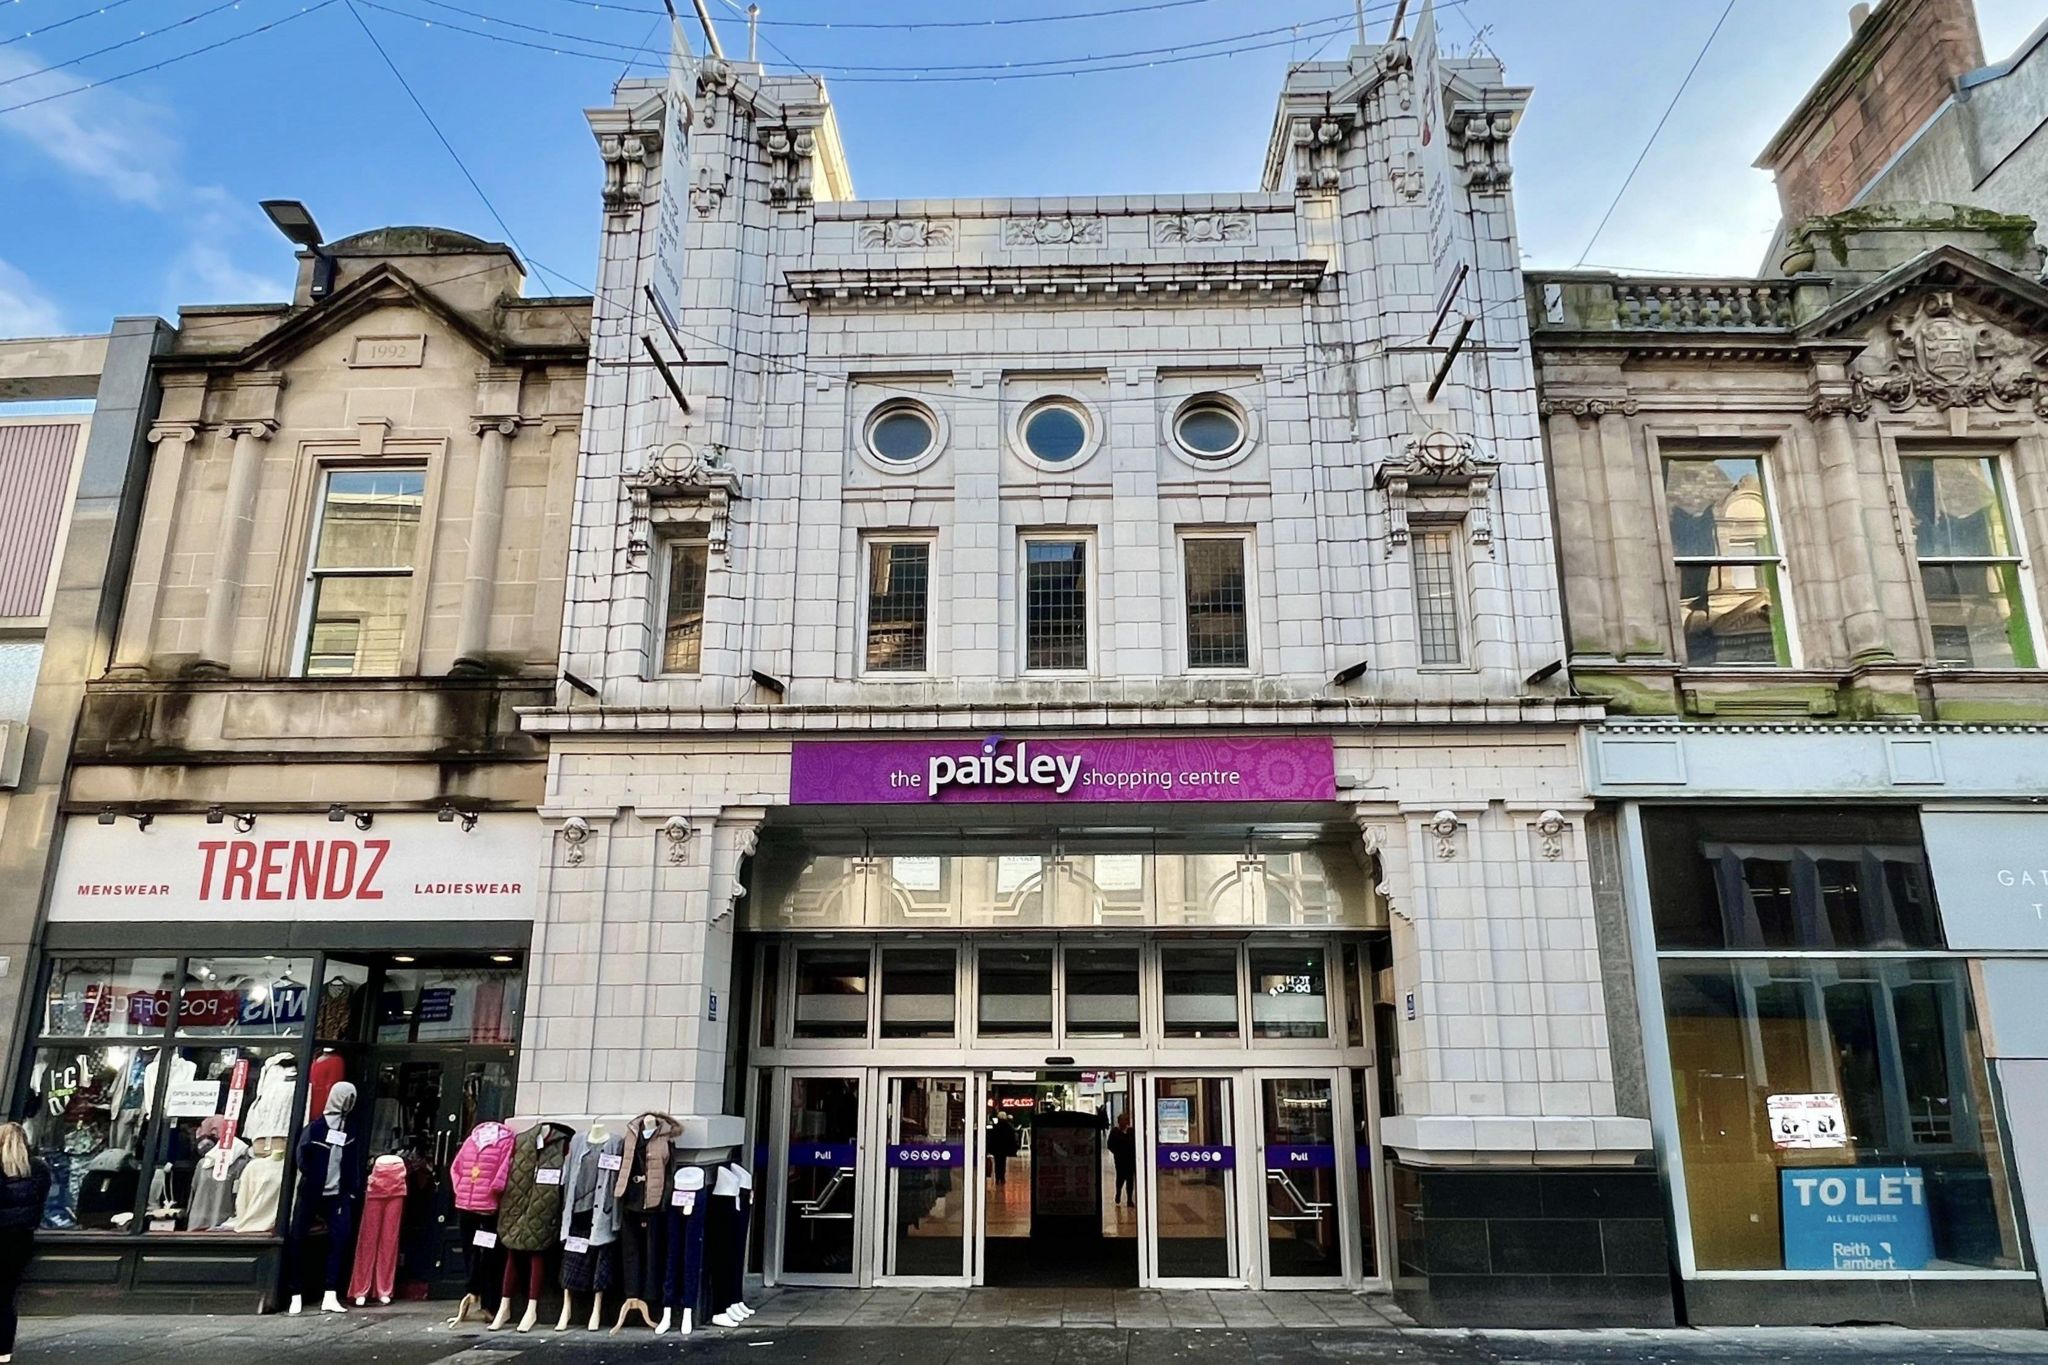 The Paisley Centre